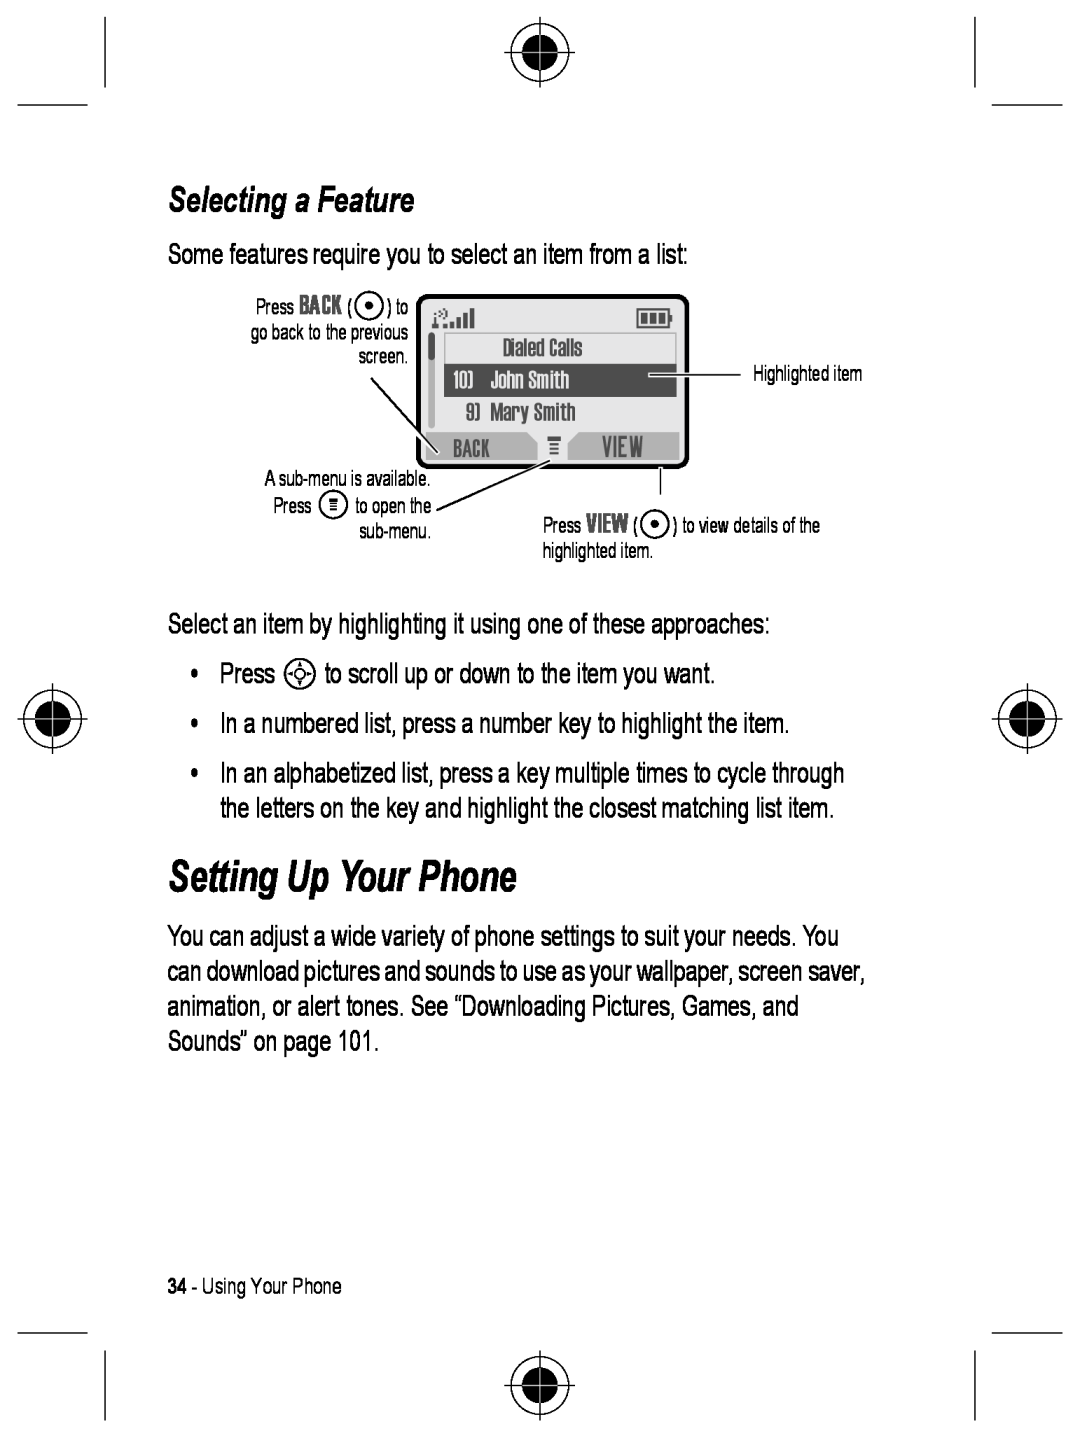 Motorola C330 manual Setting Up Your Phone, Selecting a Feature 